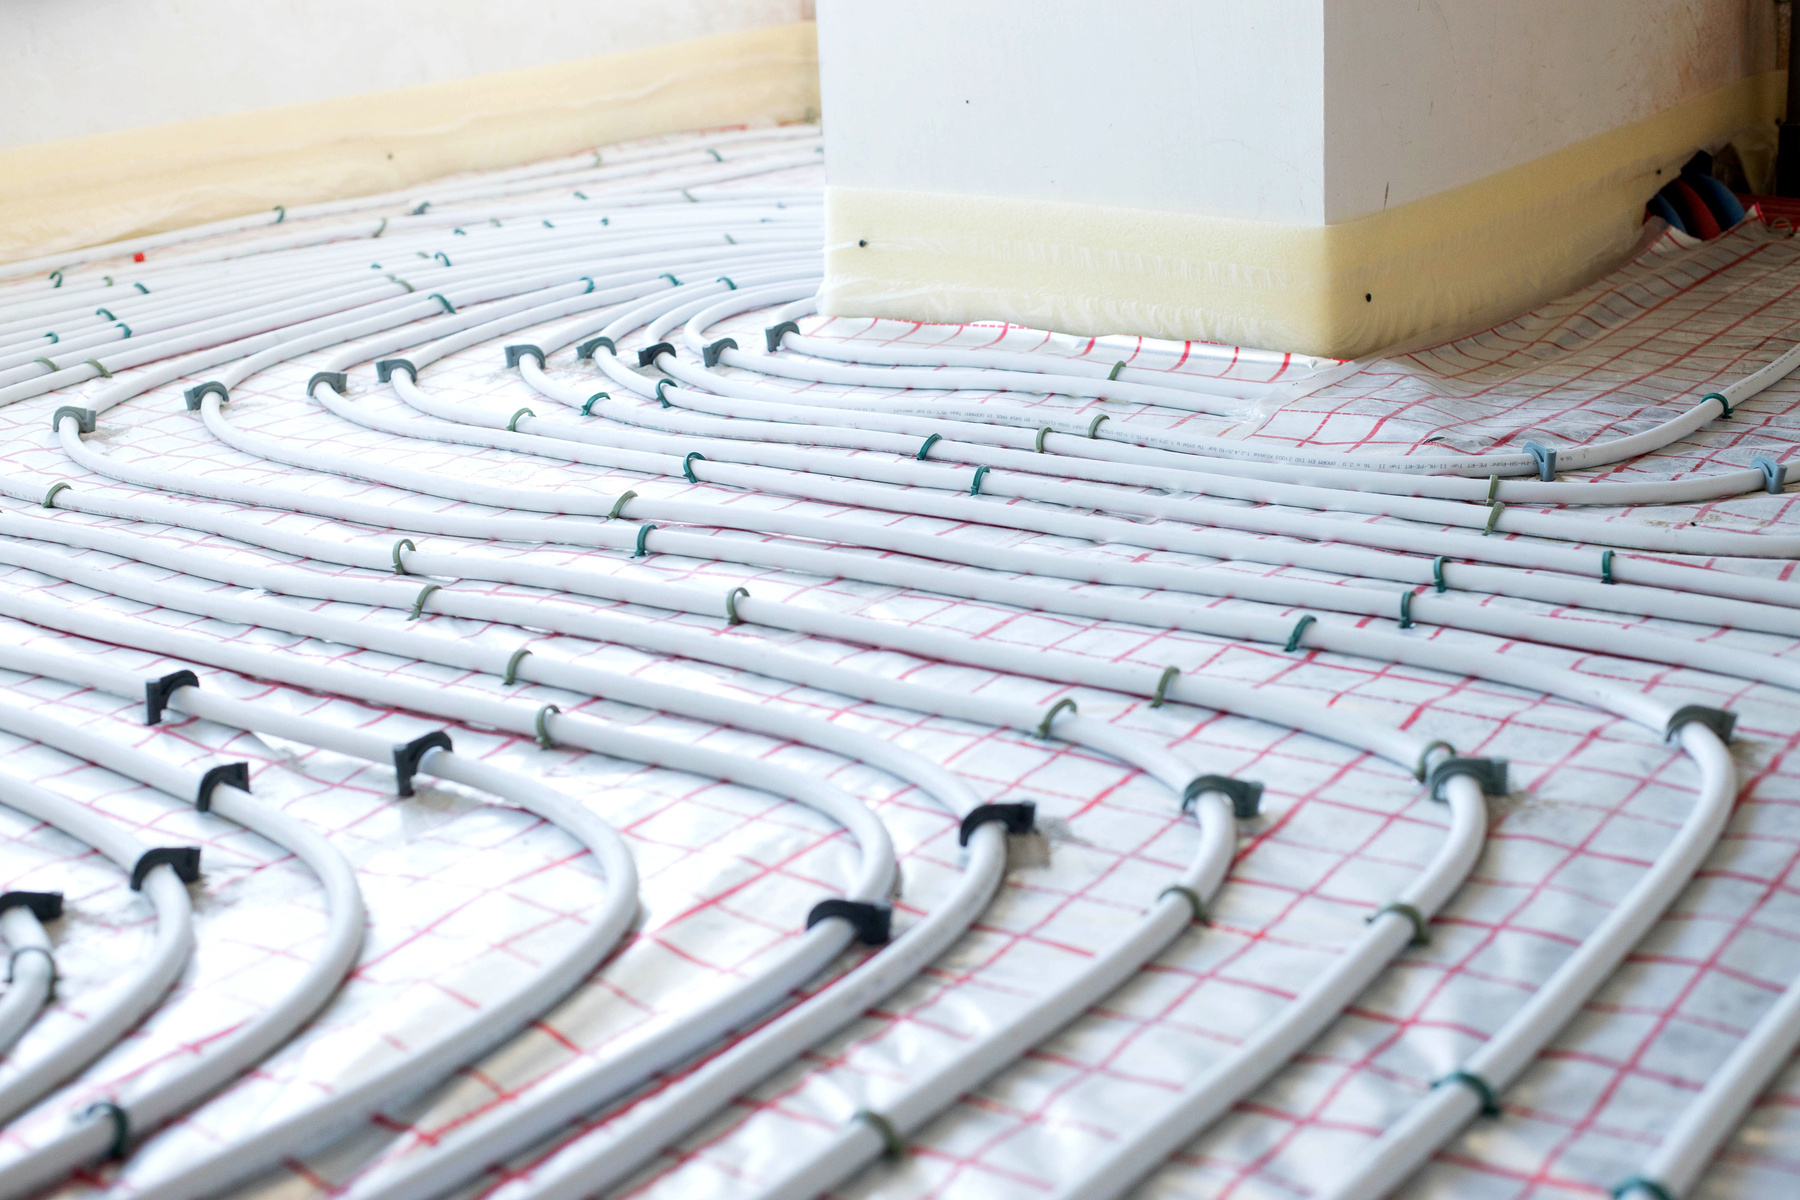 Installation of underfloor heating pipes for water heating. Heating systems. Pipes for underfloor heating.